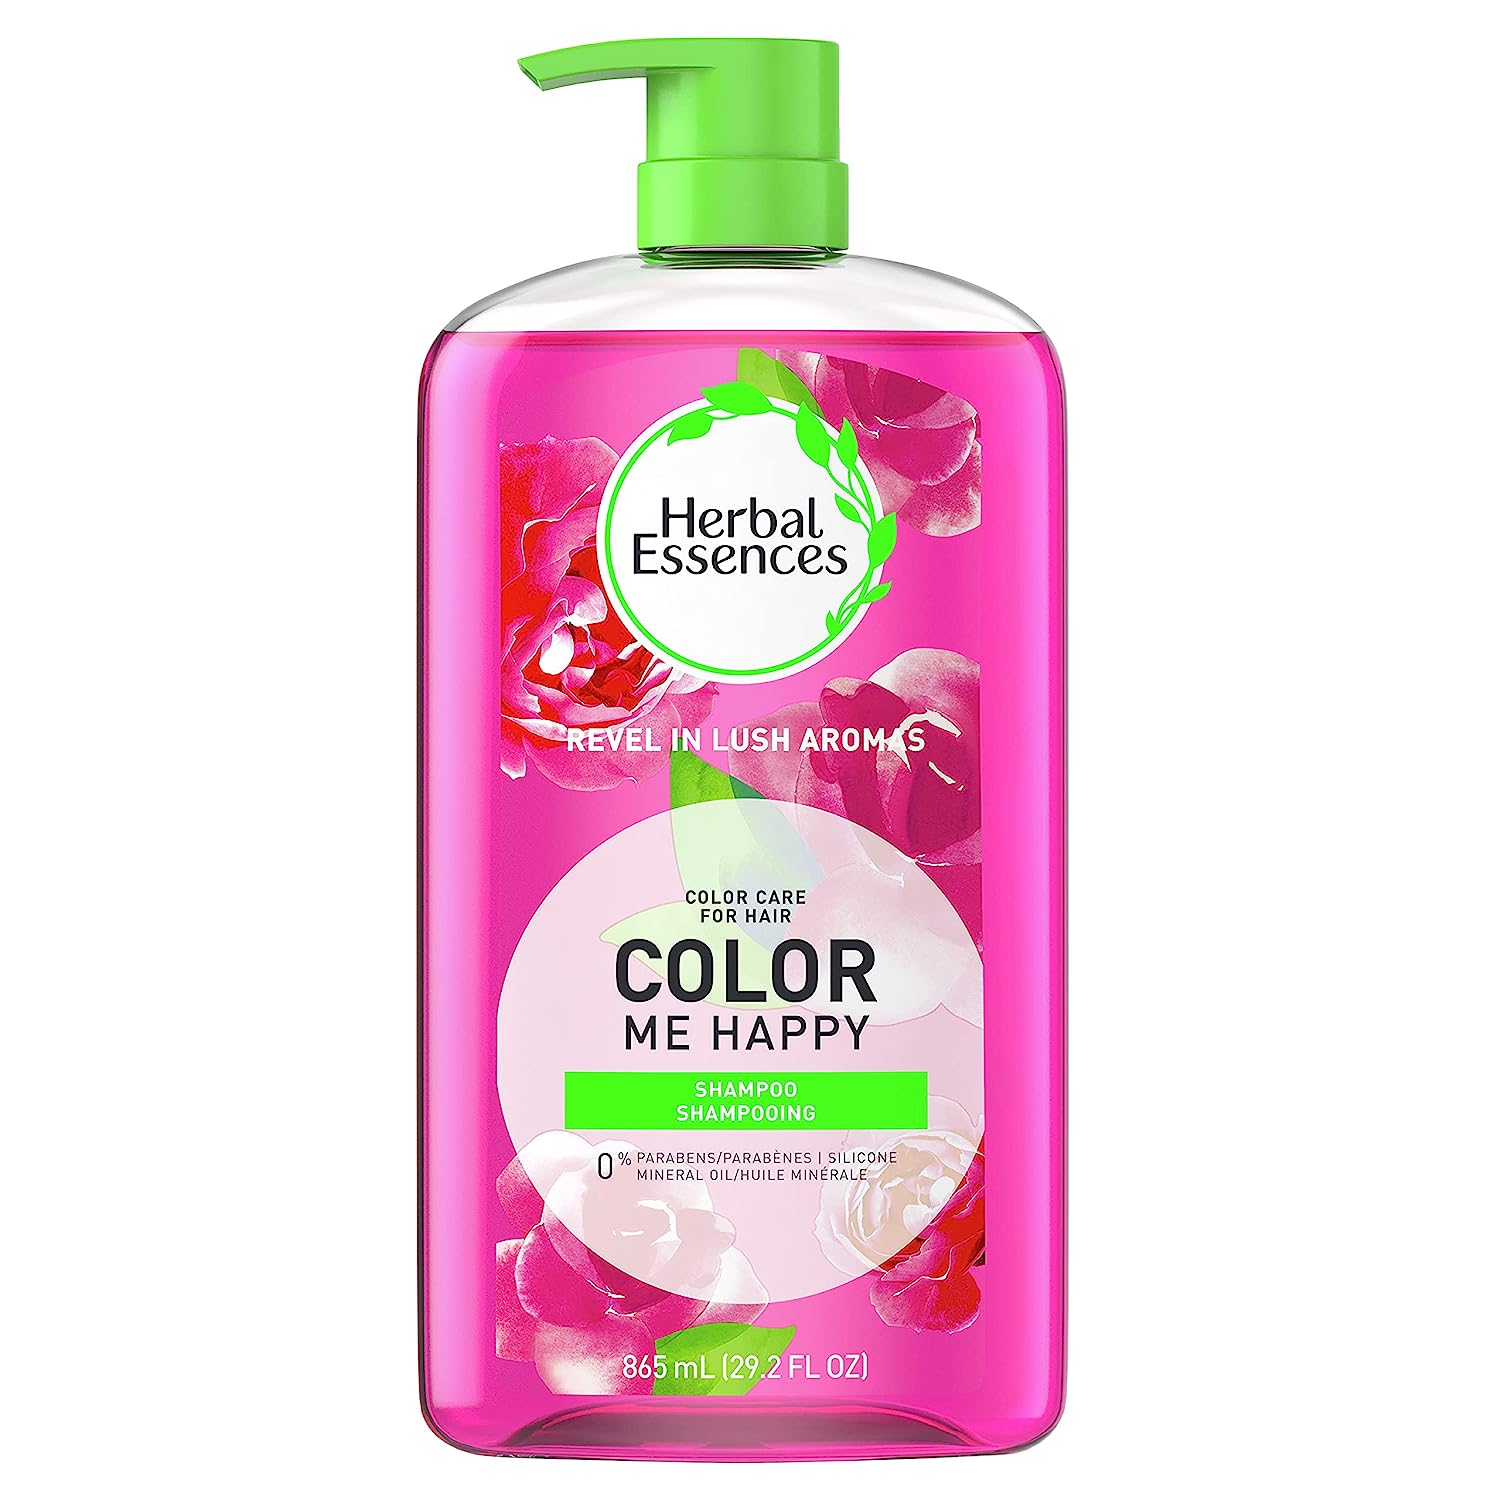 Herbal Essences Shampoo for Colored Hair, Paraben- [...]